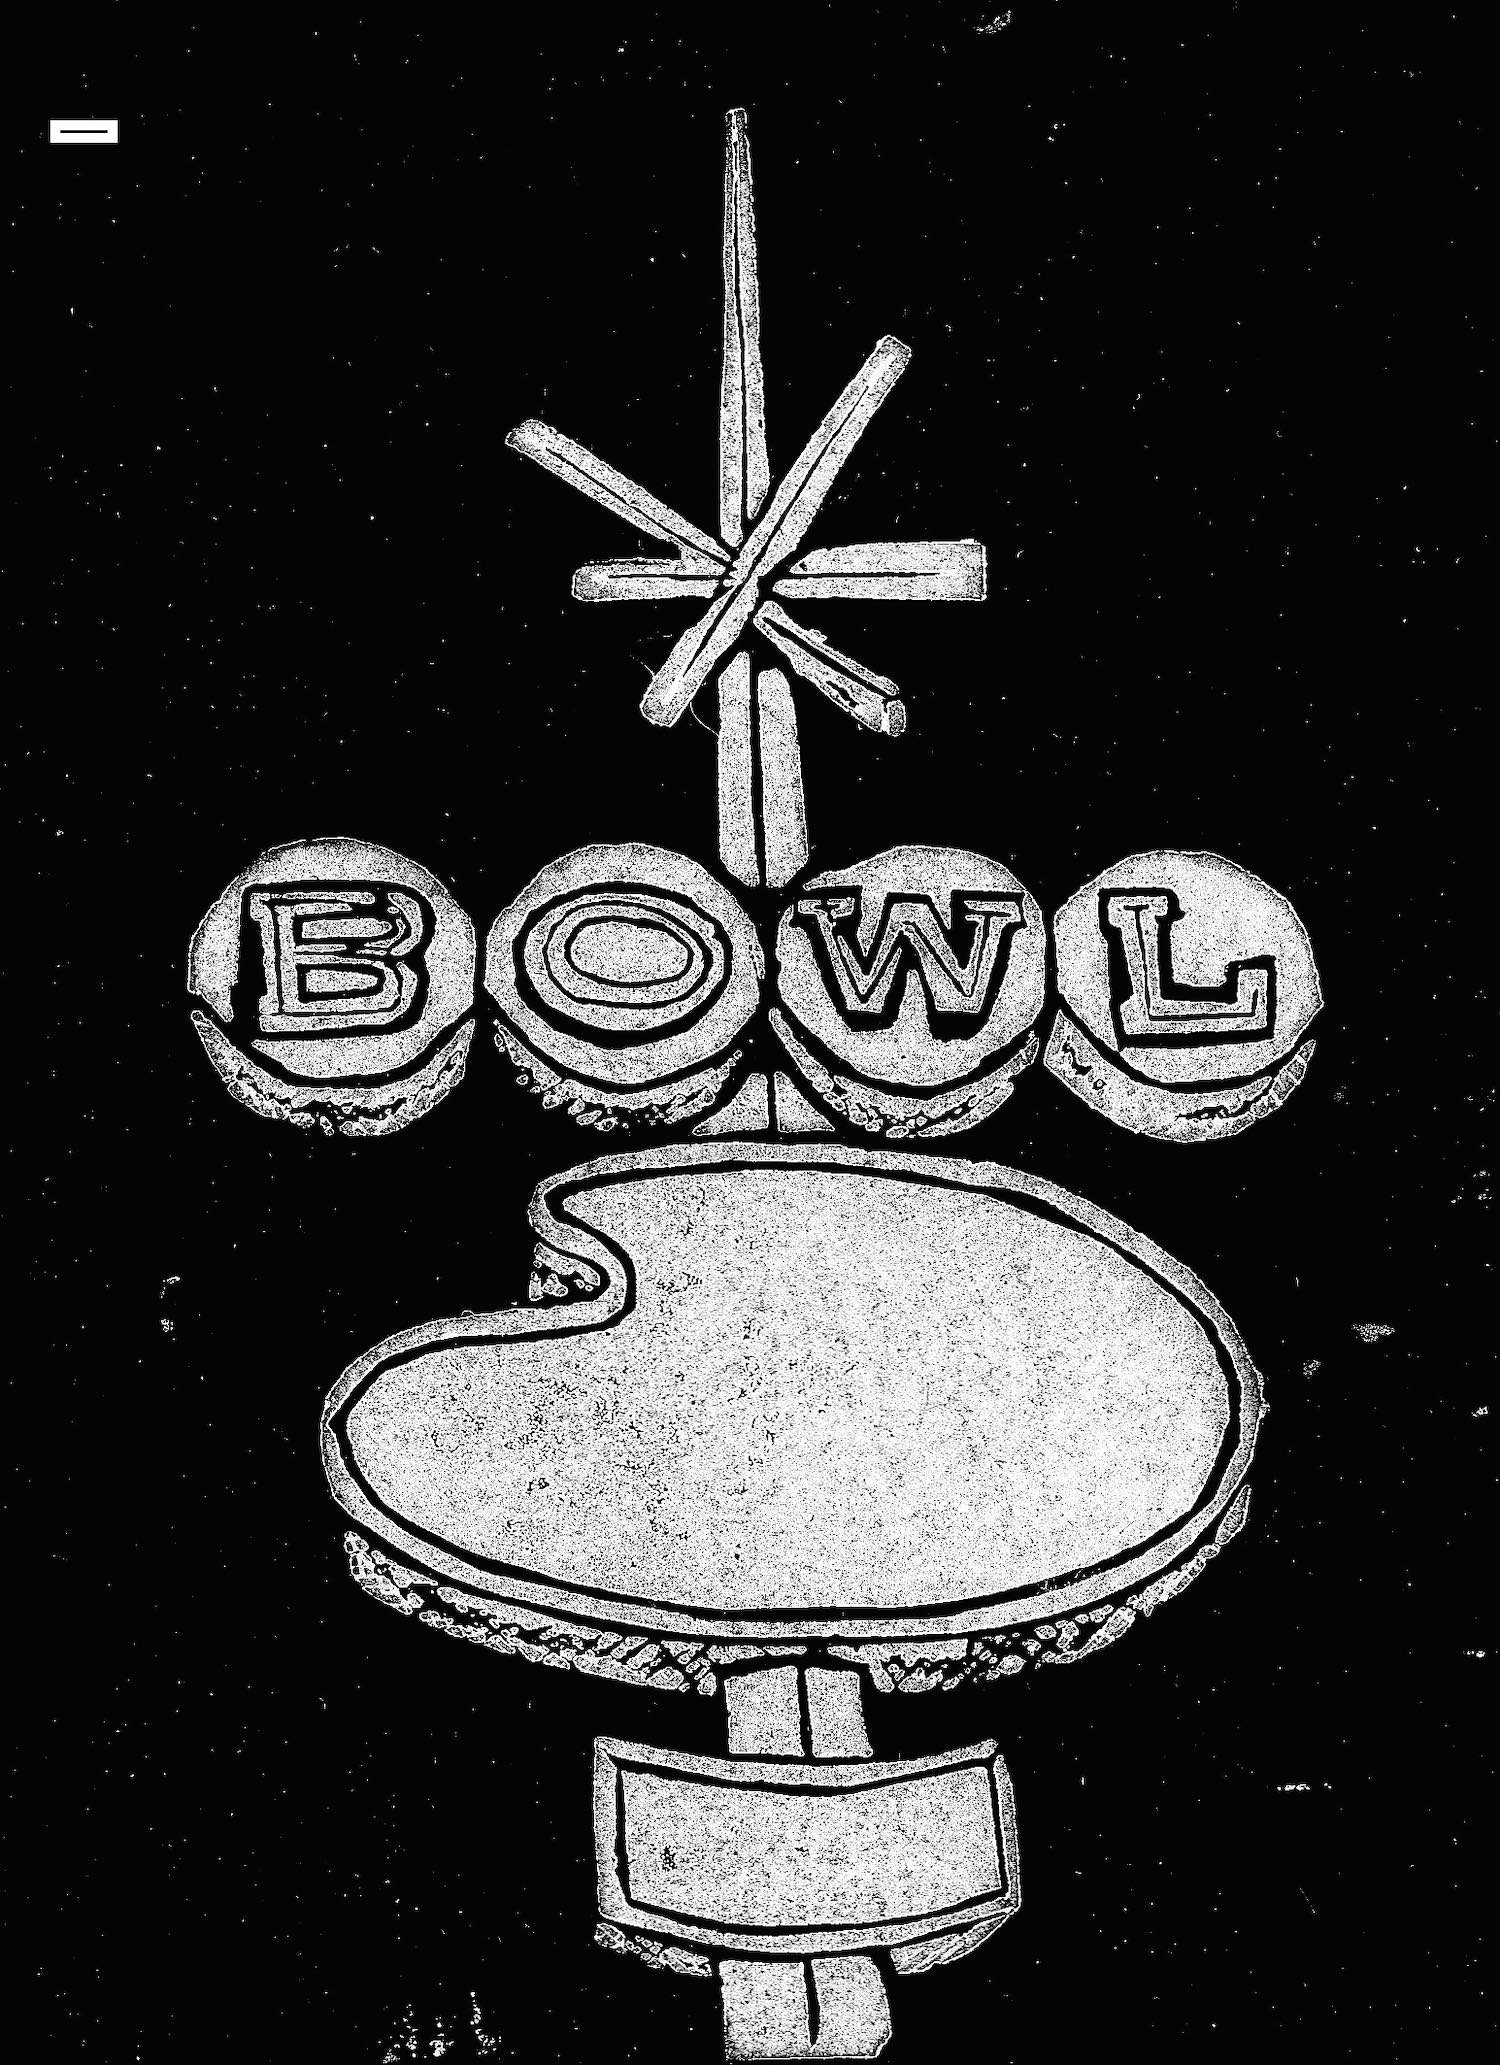 Bowling alley sign from Retrospected by Charly Fasano and Lucero.